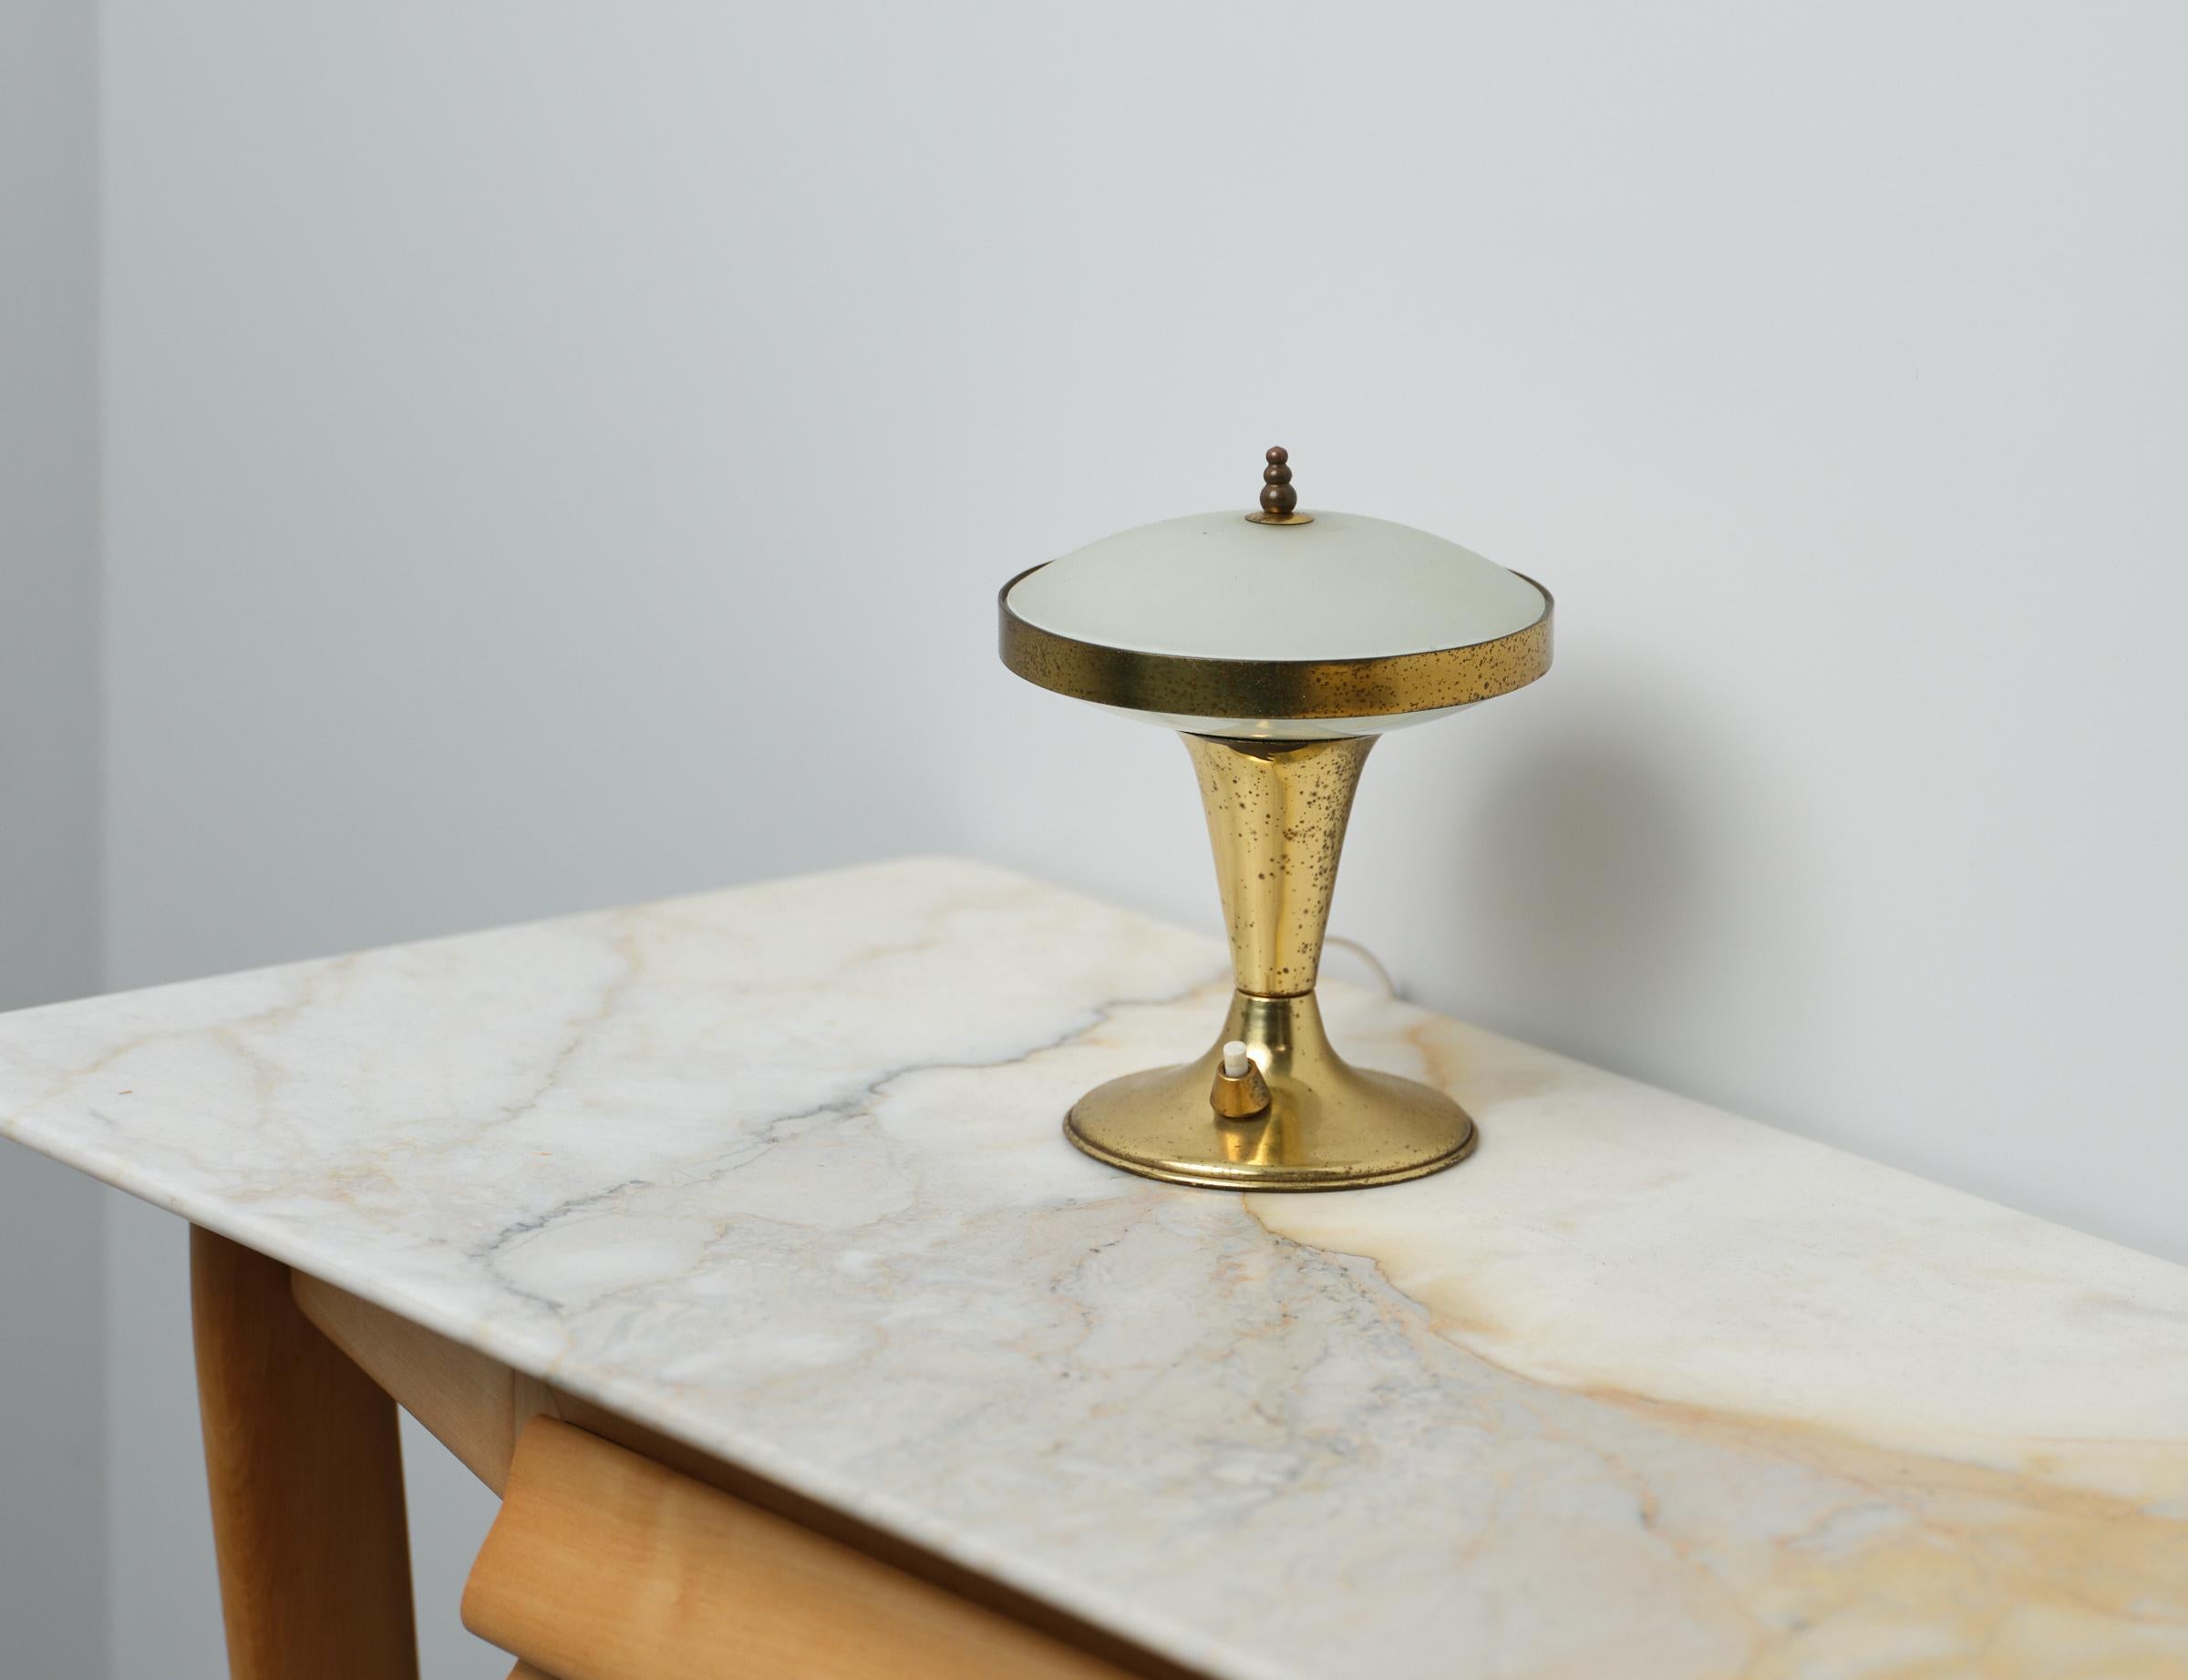  1950s Italian Brass Table Lamp. This lamp embodies the elegance and sophistication of the era, featuring a genuine brass construction with a beautifully aged oxidized patina. Its frosted glass shade adds a touch of vintage charm while diffusing a